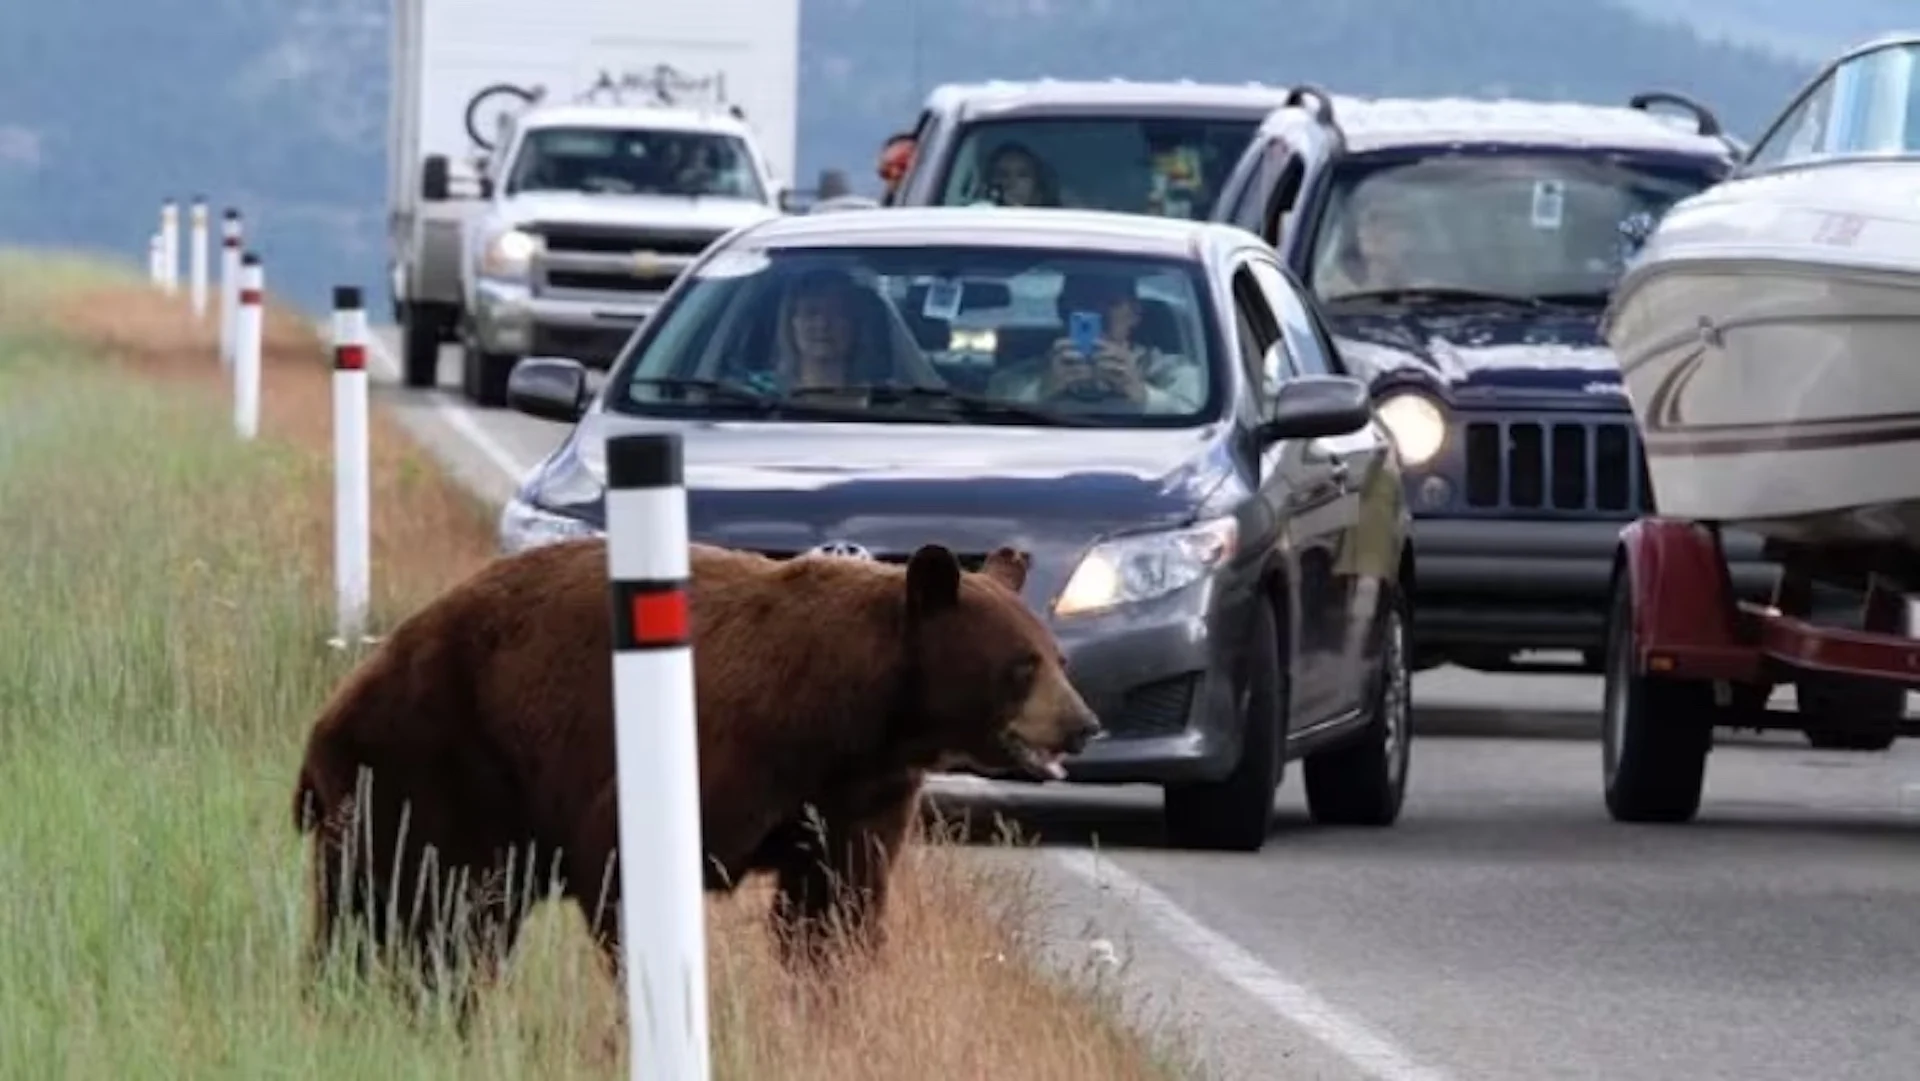 Stuck in 'bear jam' traffic? Researcher studies how to keep cars moving safely